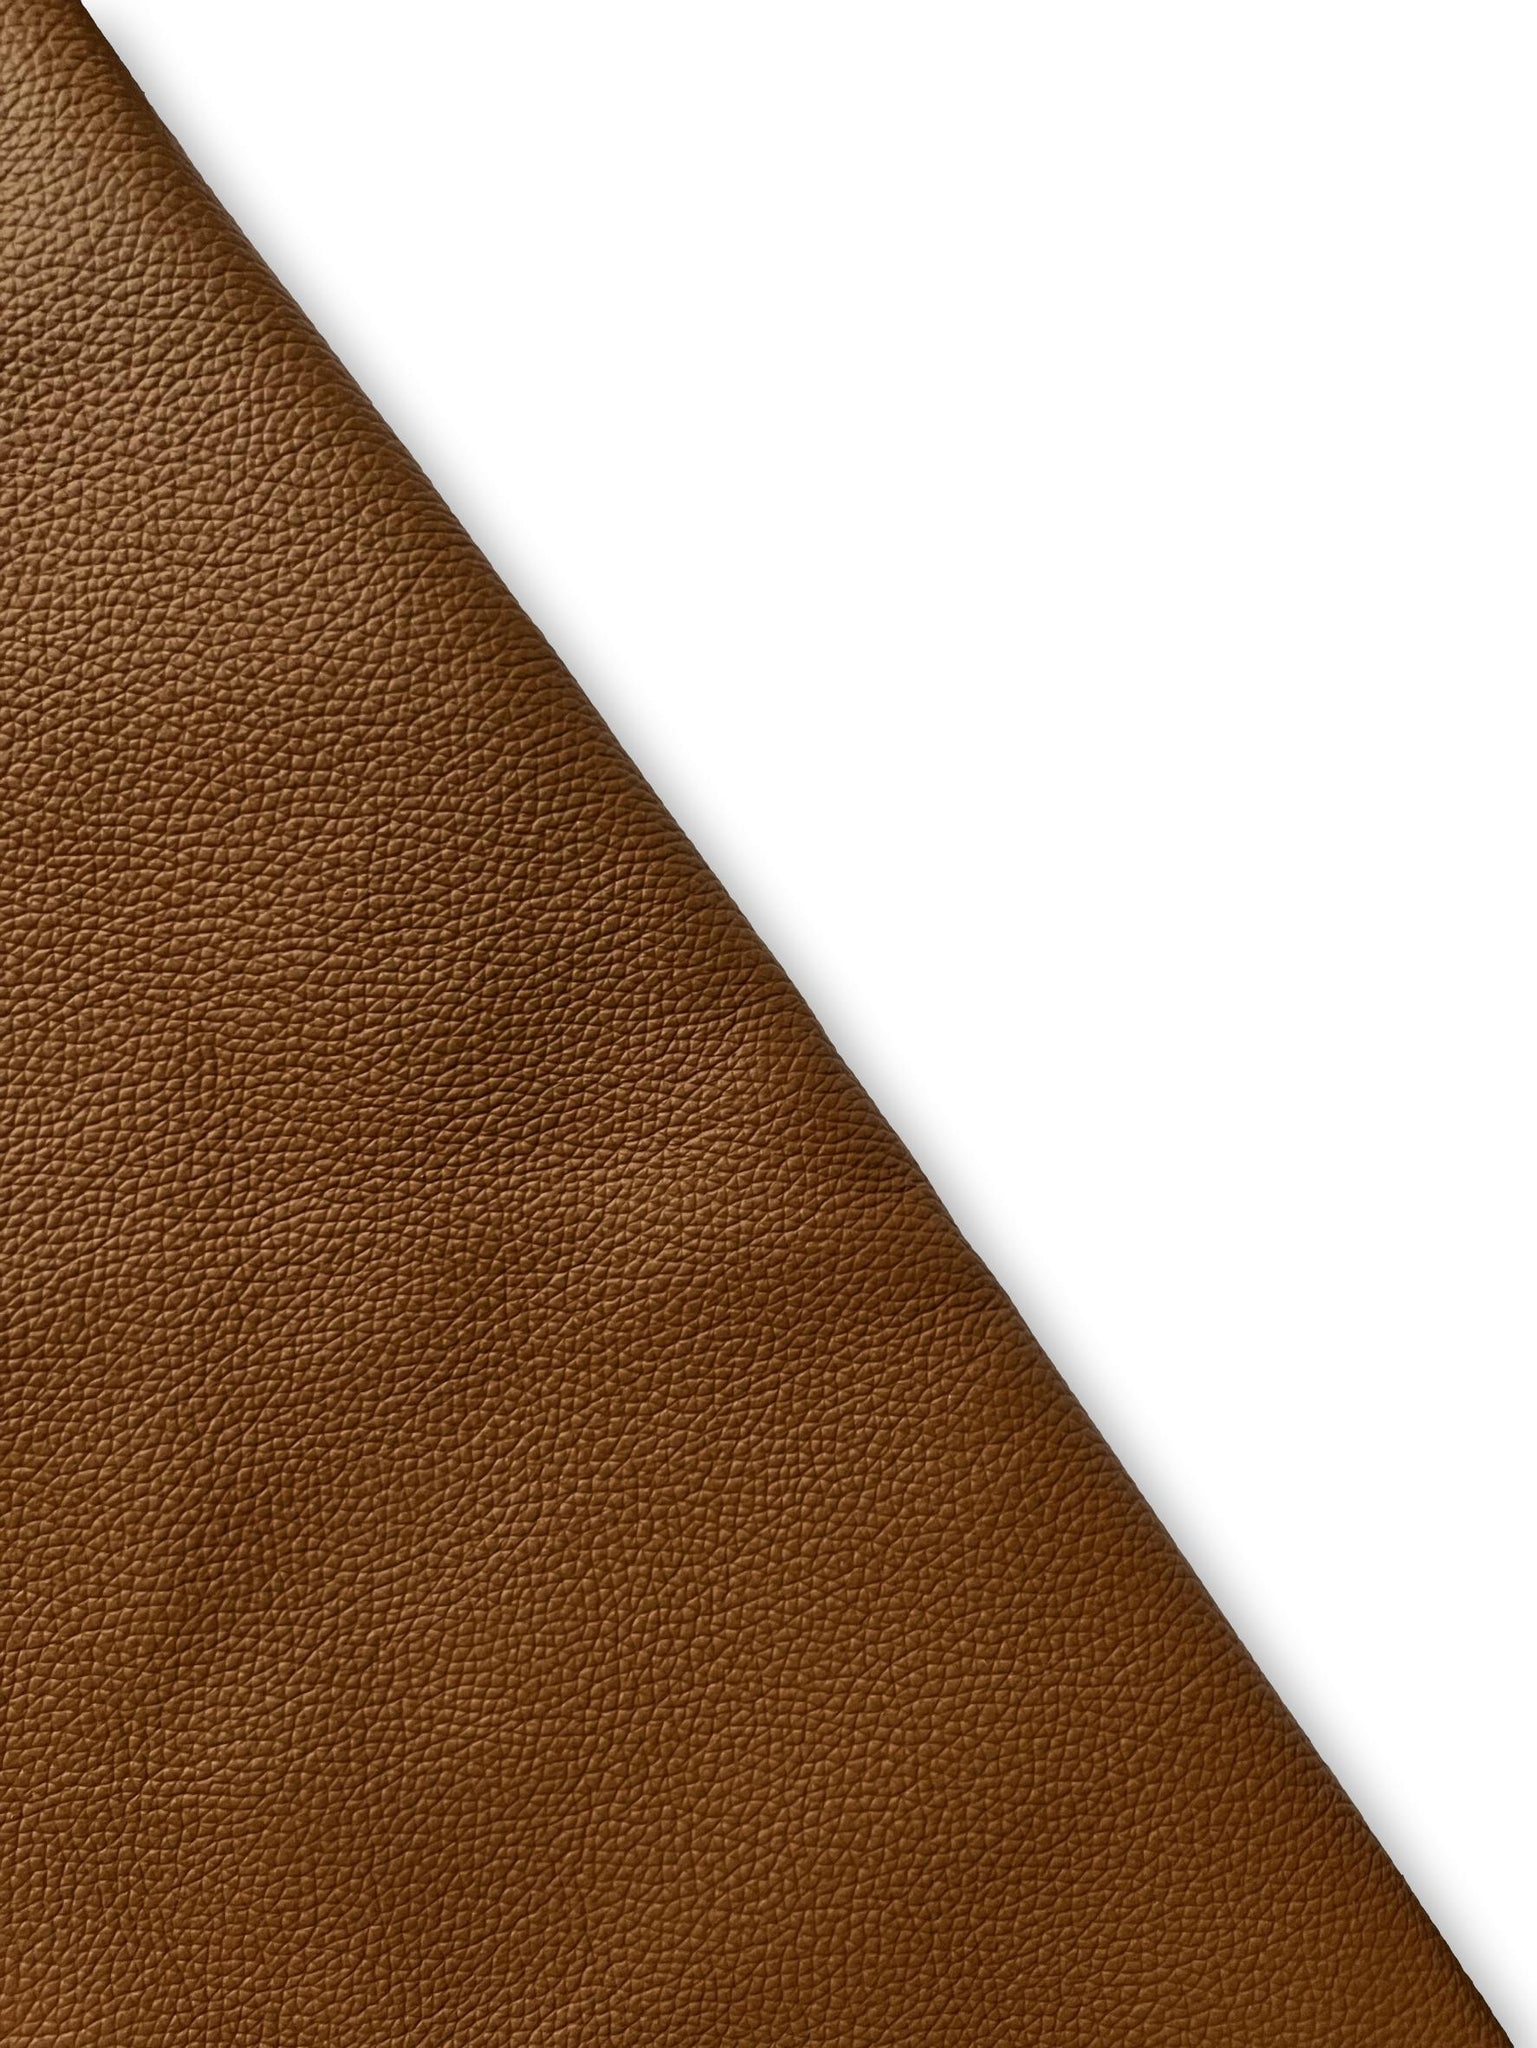 Cognac Classic Upholstery Cow Leather Whole Hide